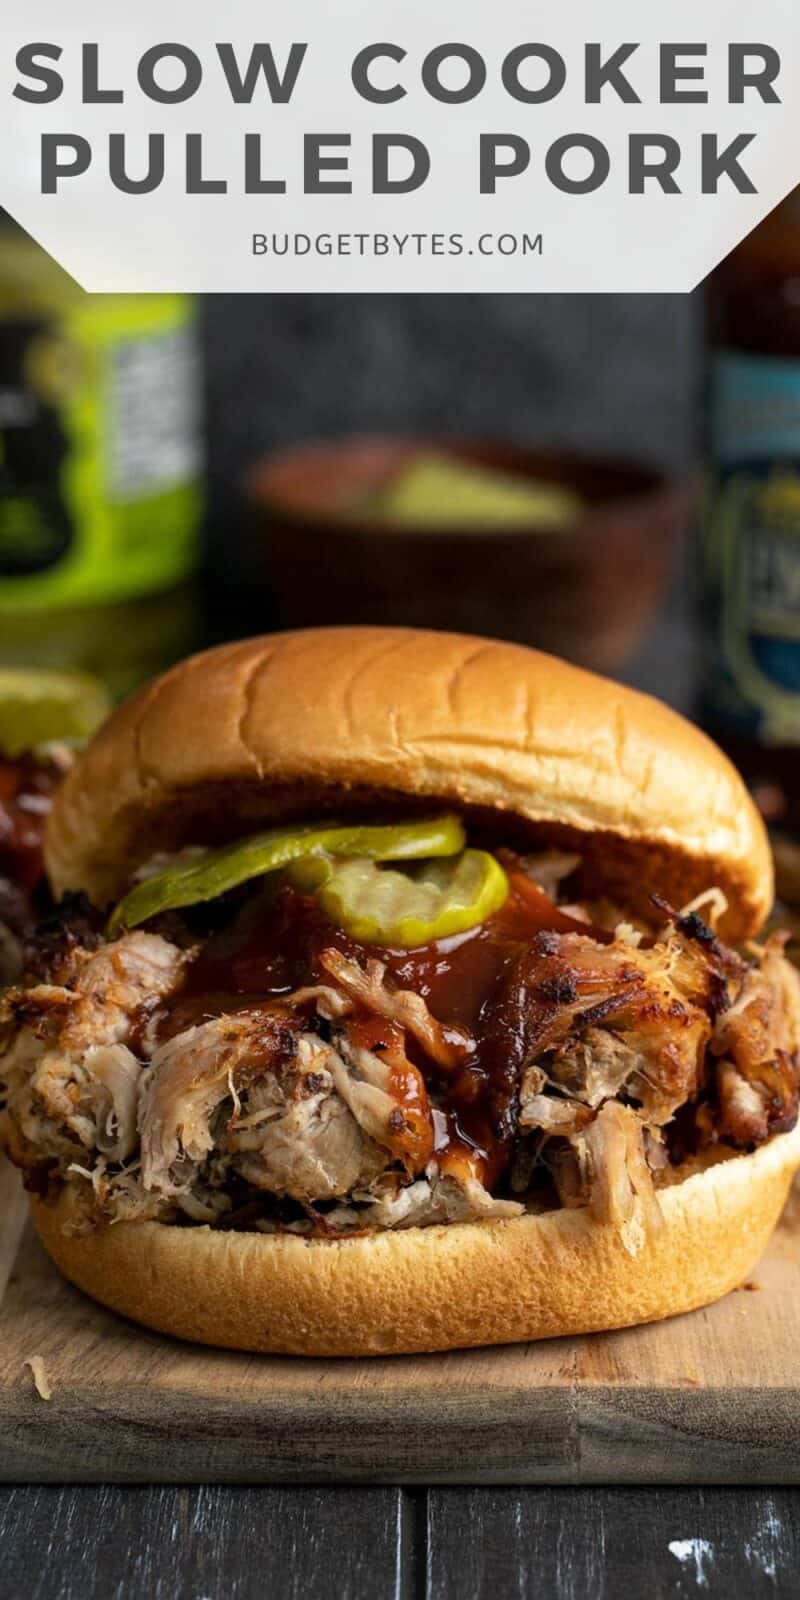 Side view of a pulled pork sandwich, title text at the top.